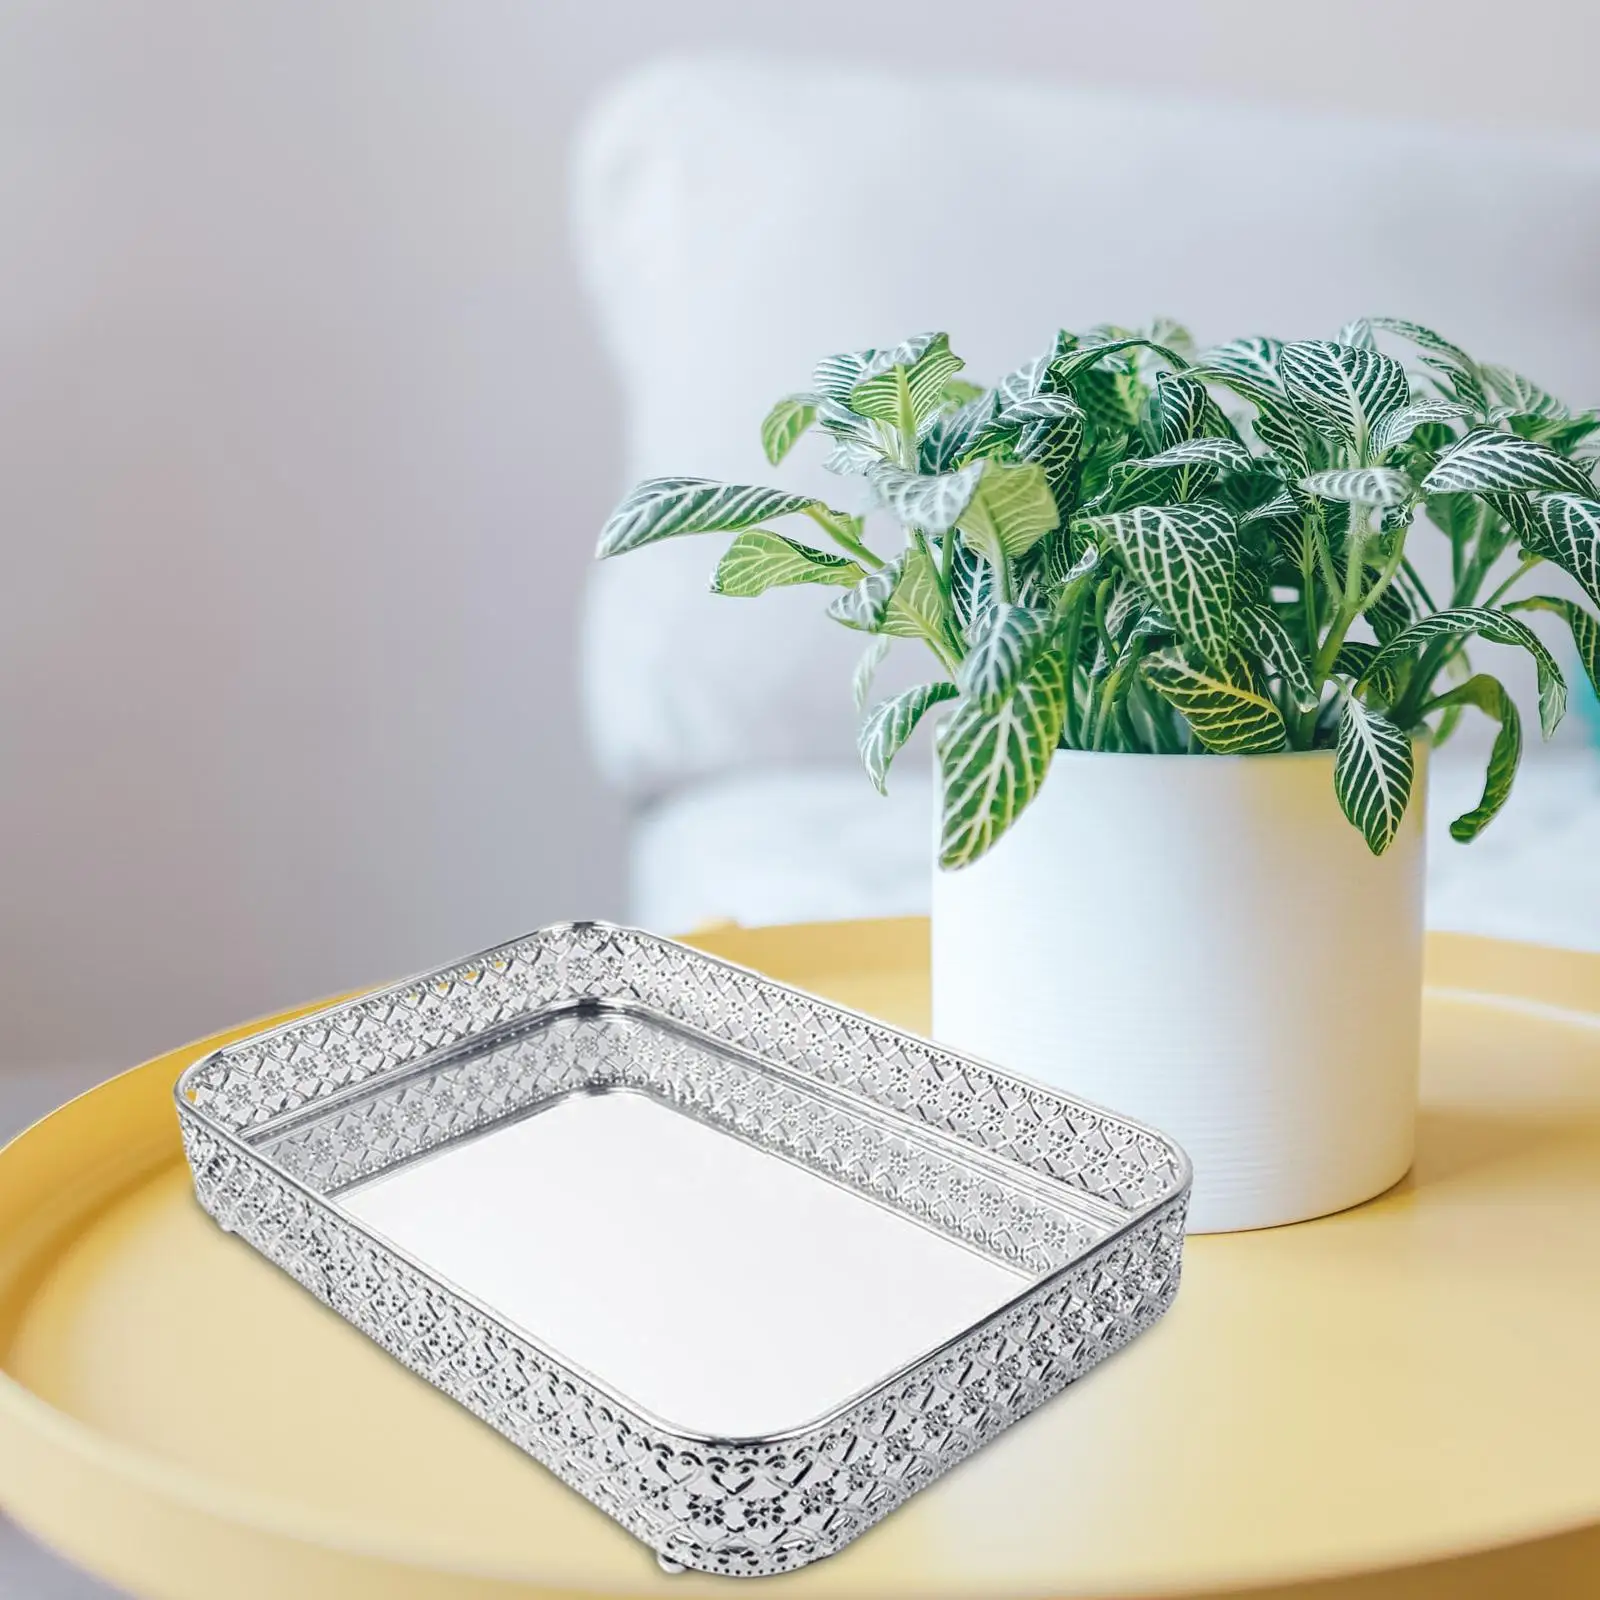 Mirror Finished Decorative Tray Cosmetic Makeup Tray Jewelry Trinket Organizer Tray for Bathroom Countertop Wedding Home Sister